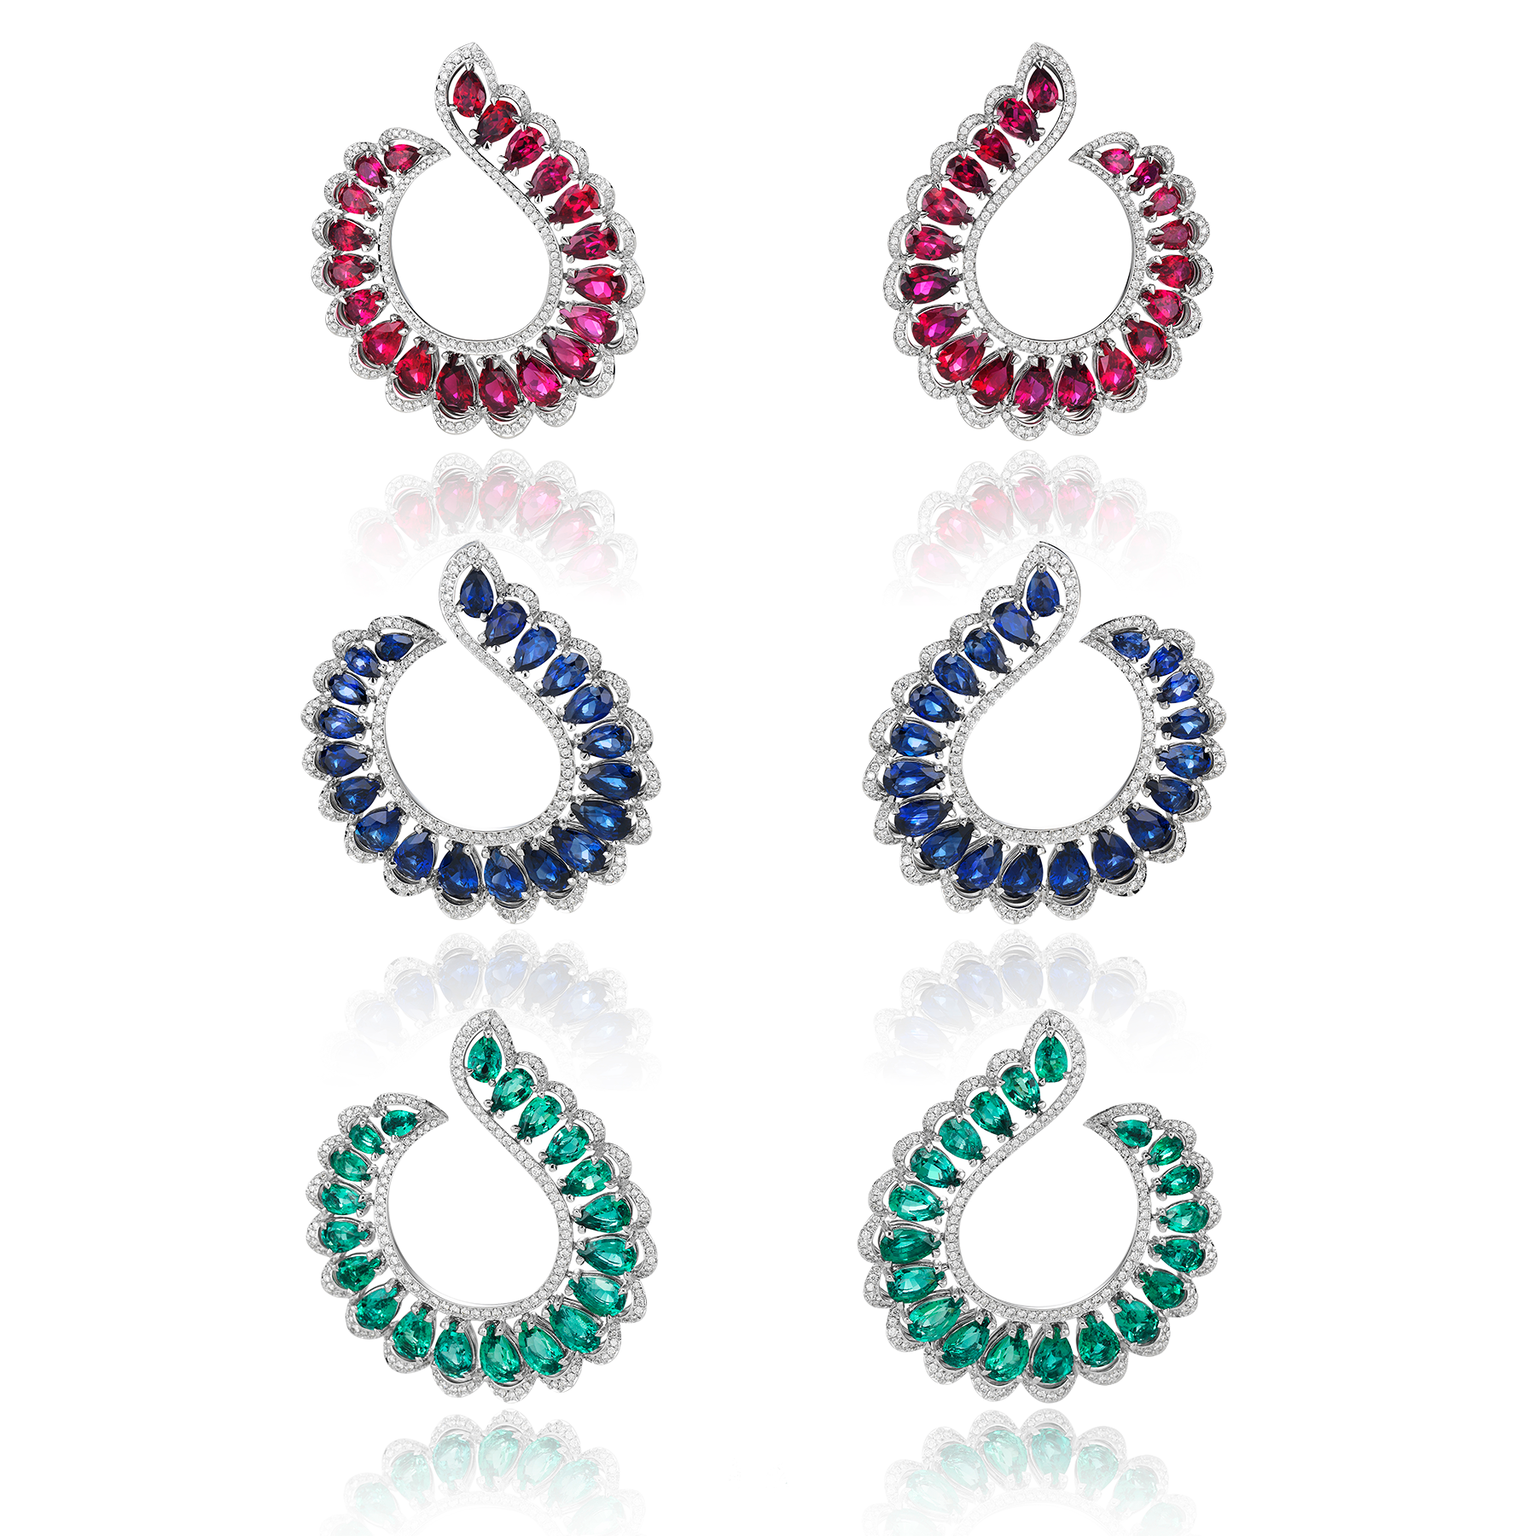 Chopard Precious earrings set with rubies, sapphires and emeralds